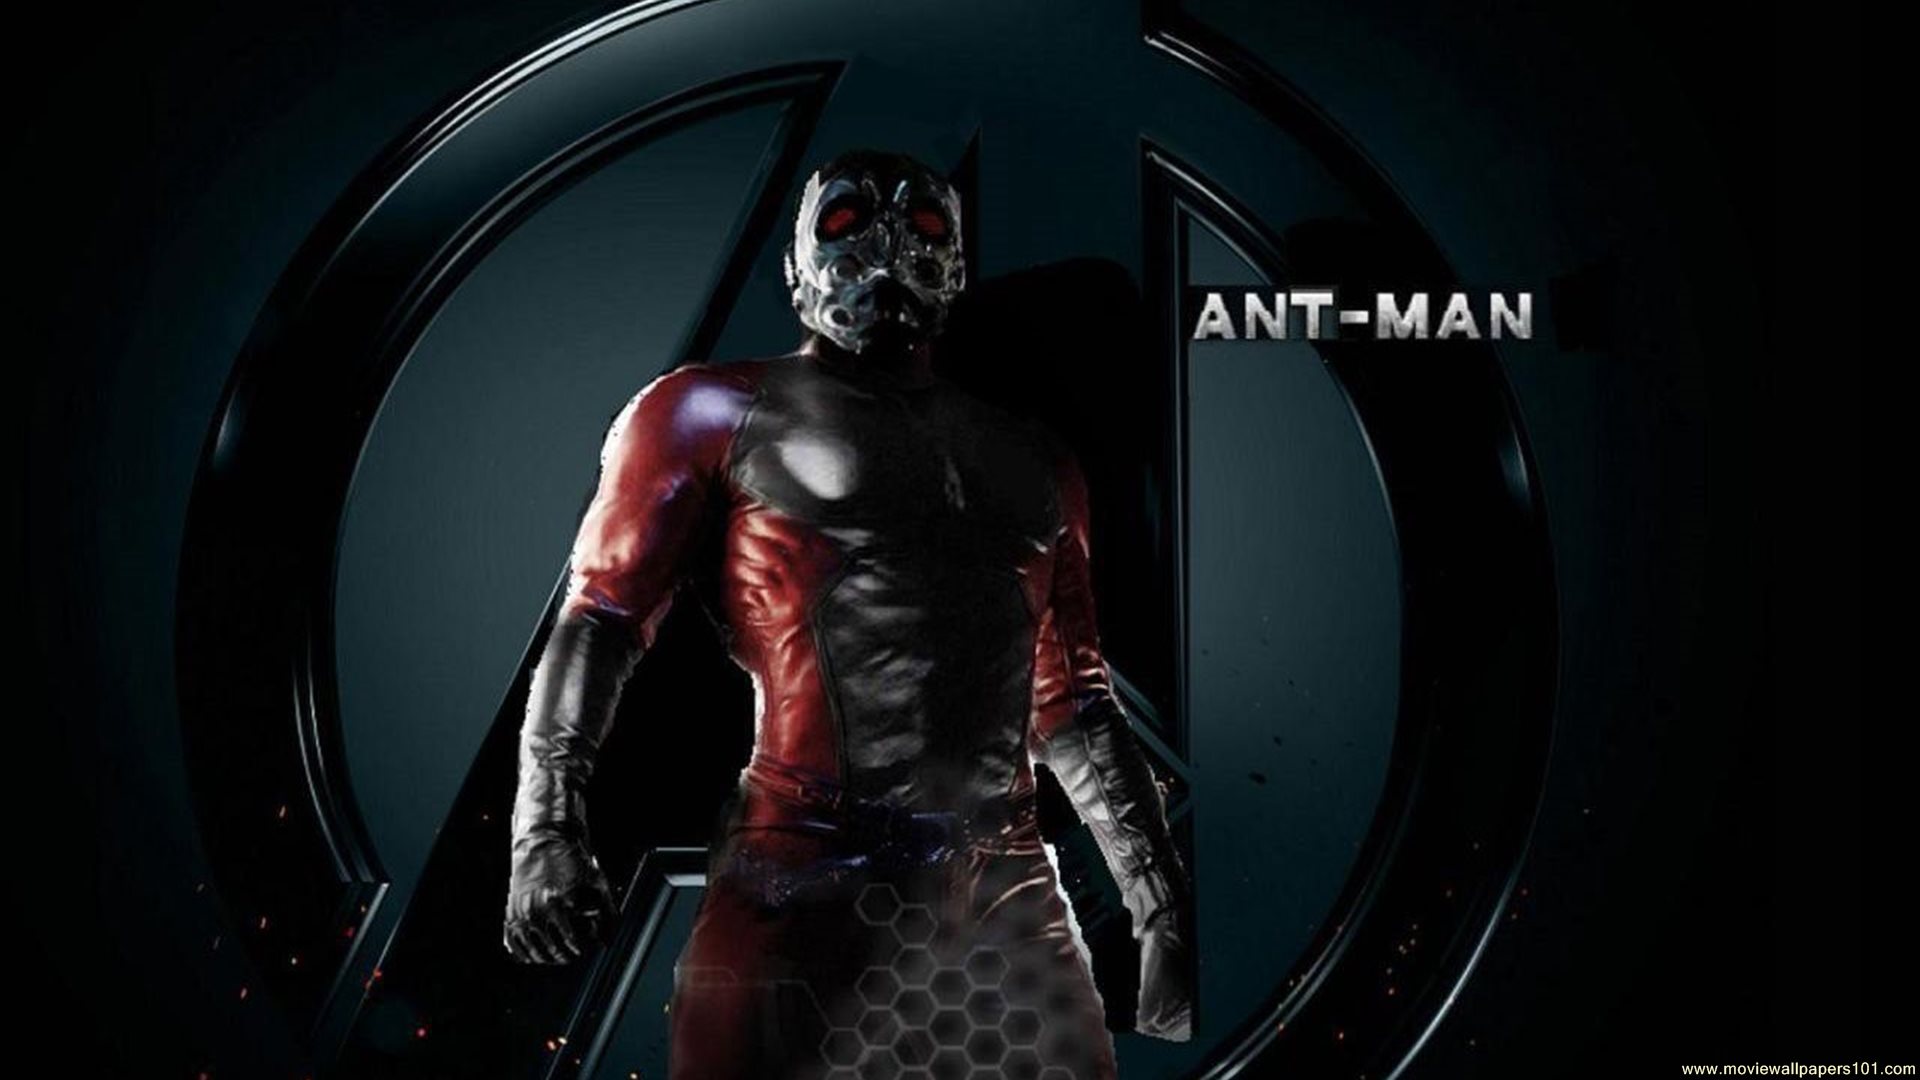 Download Ant Man 2015 Movie Super Hero HD Wallpaper Search more high